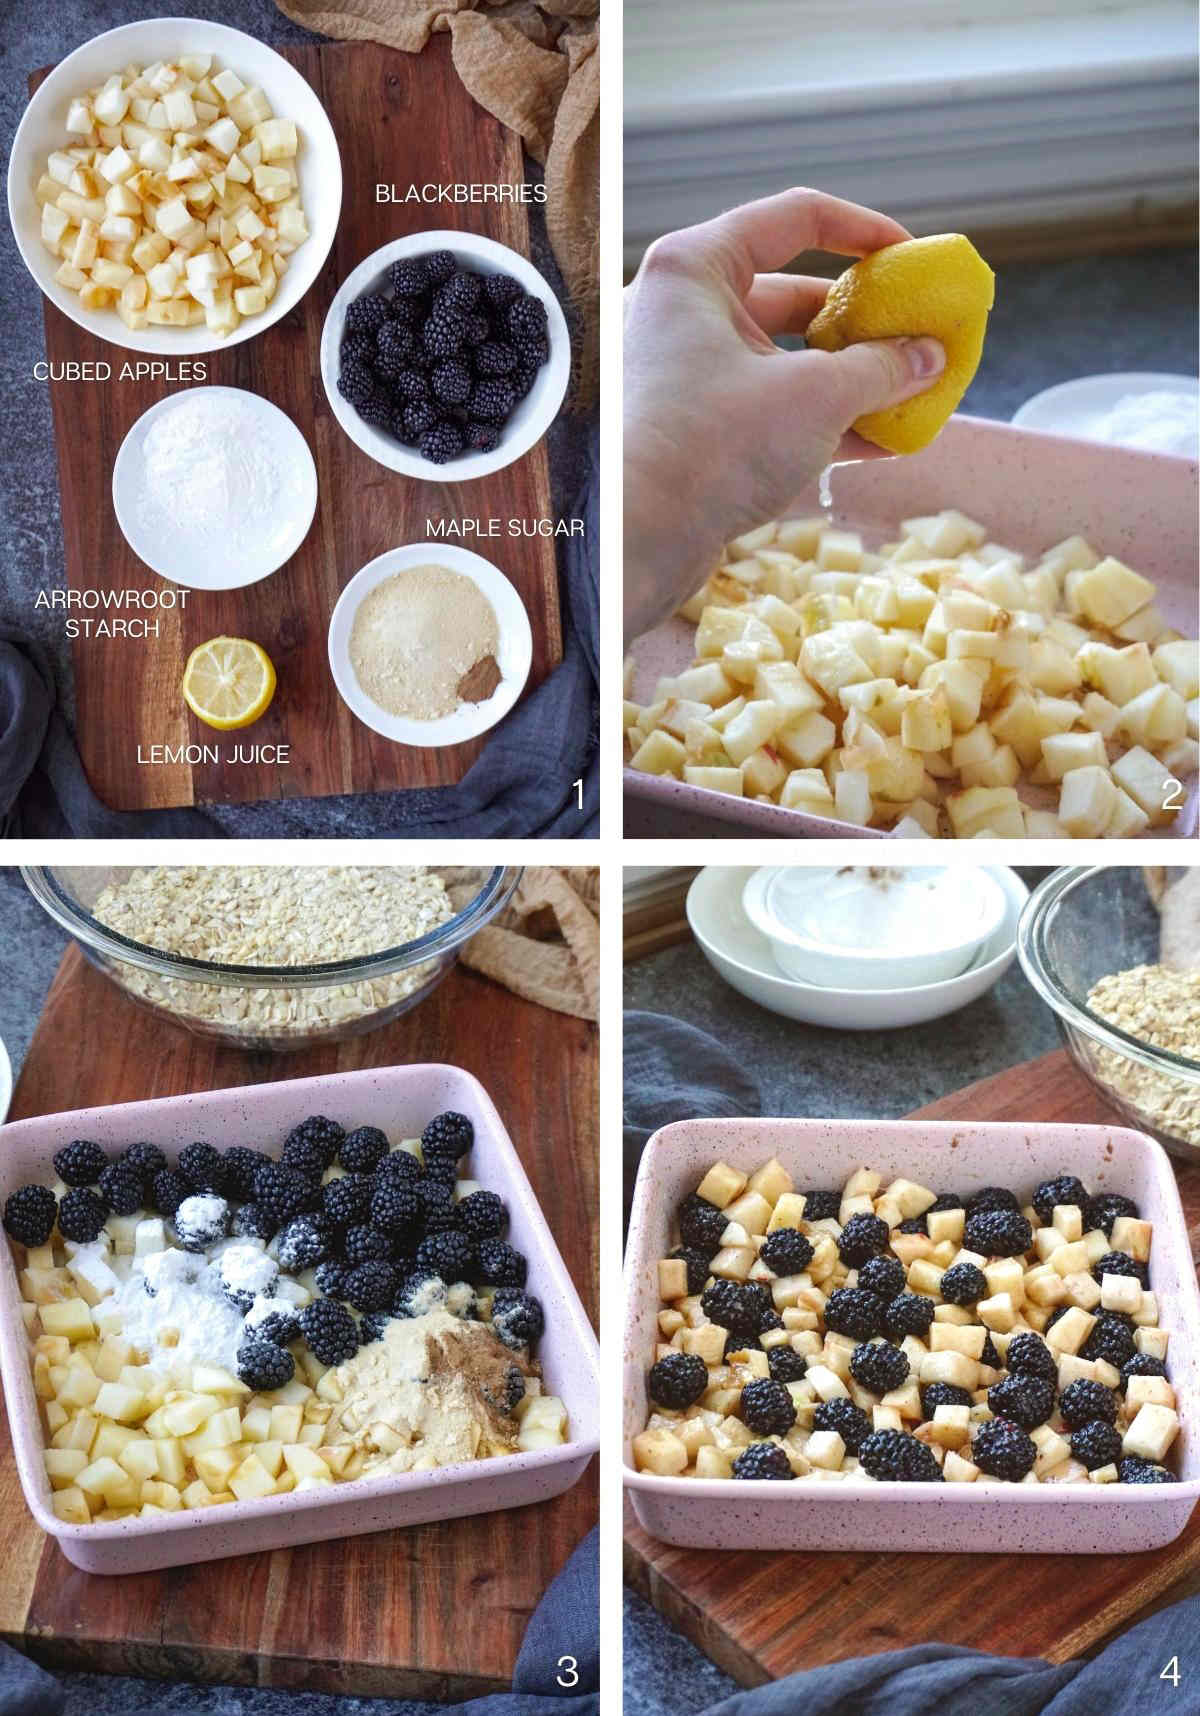 Step by step process shots showing how to make apple and blackberry crumble filling.